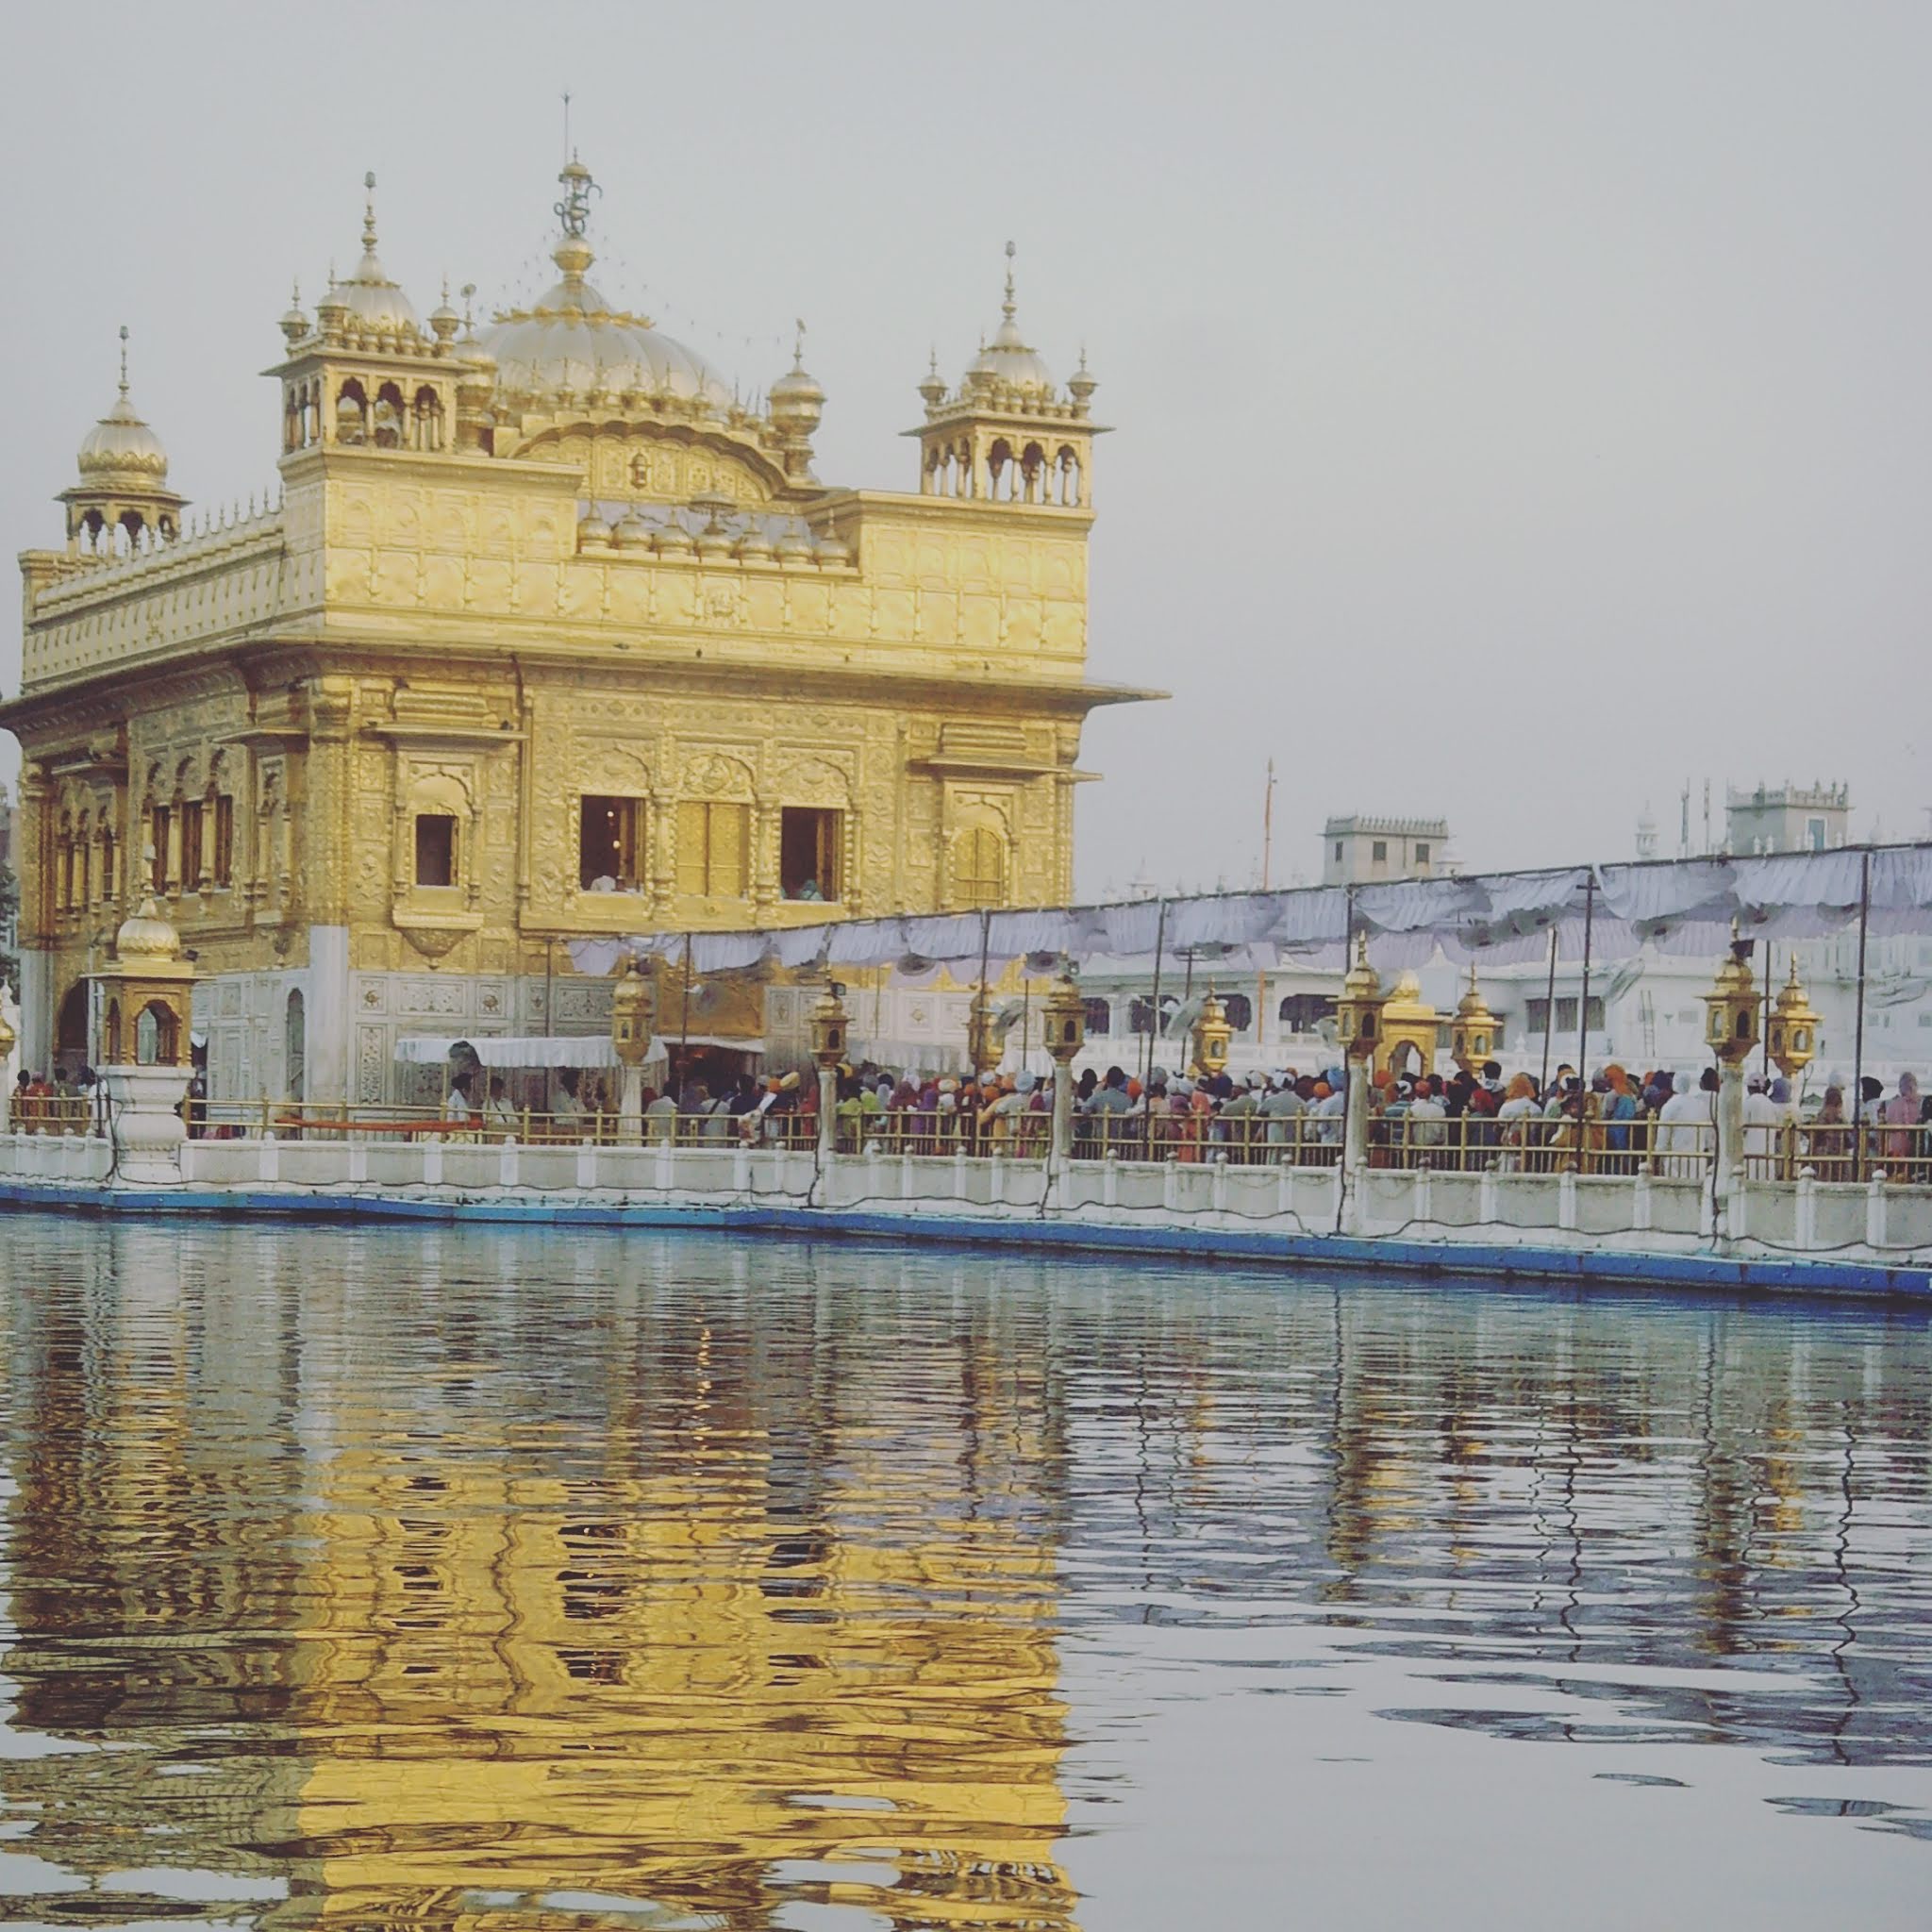 The golden temple on lake amritsar in india with reflections, it's one of the most beautiful temples in india